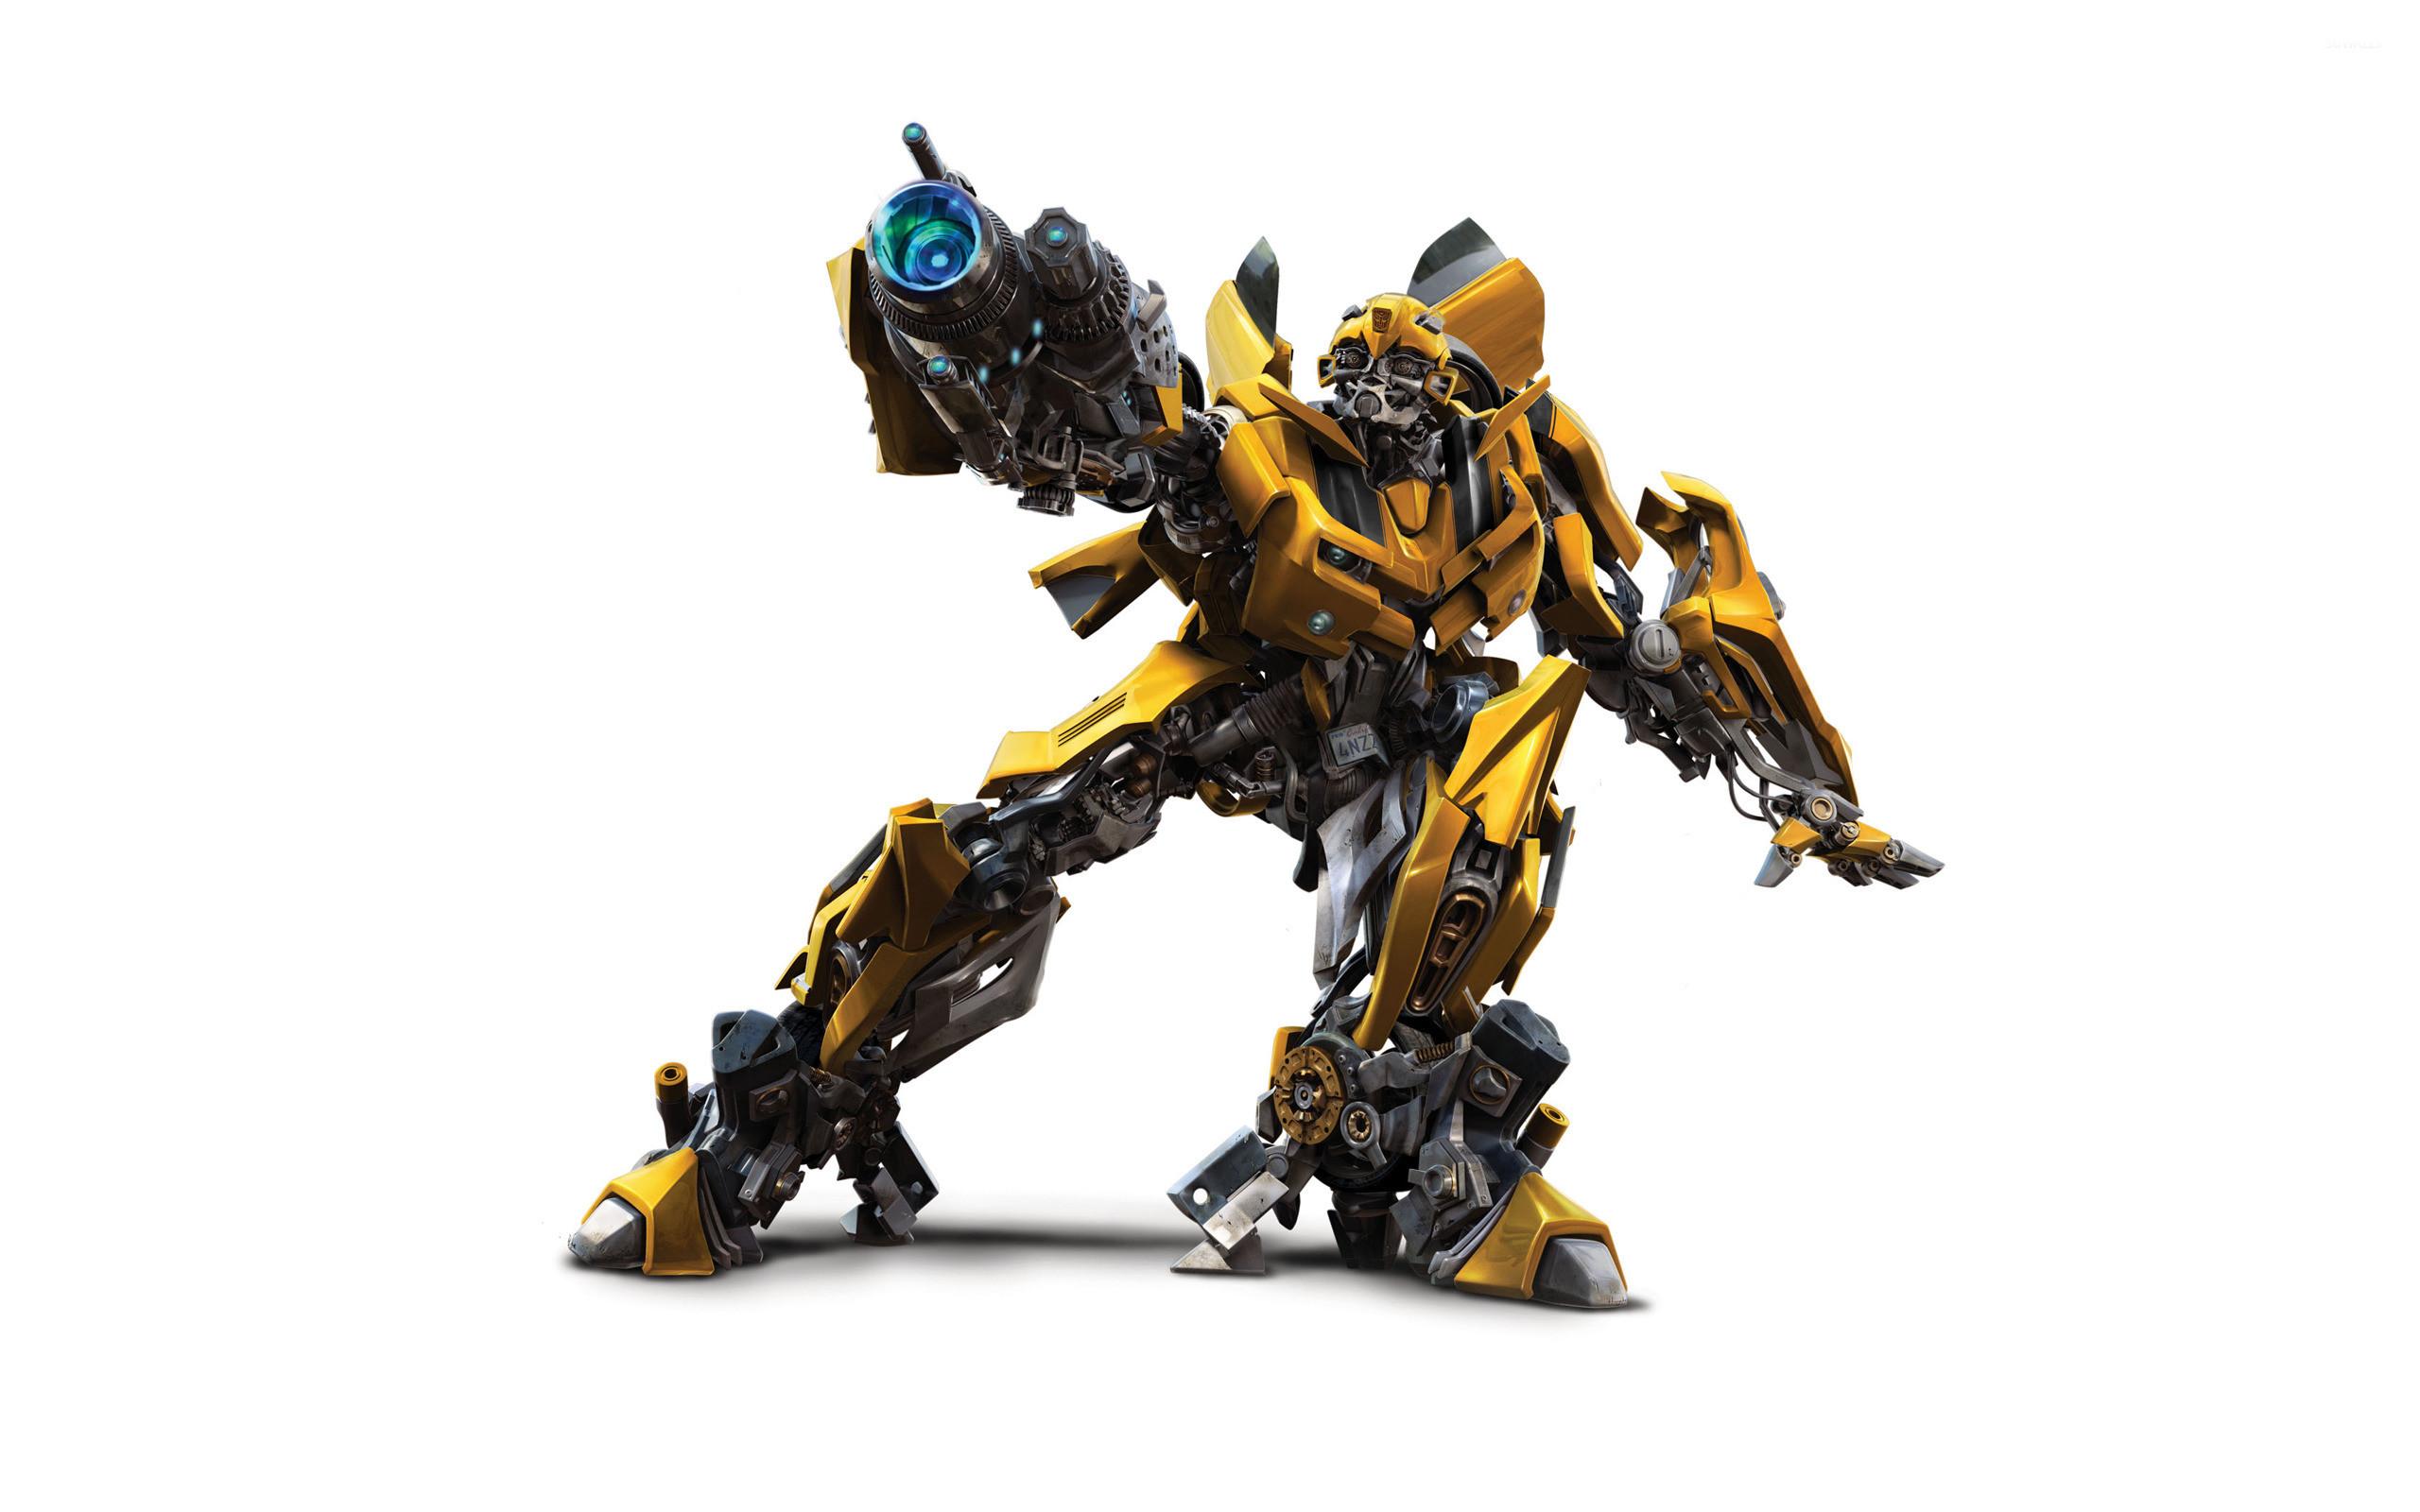 Transformers Bumblebee Wallpaper background picture